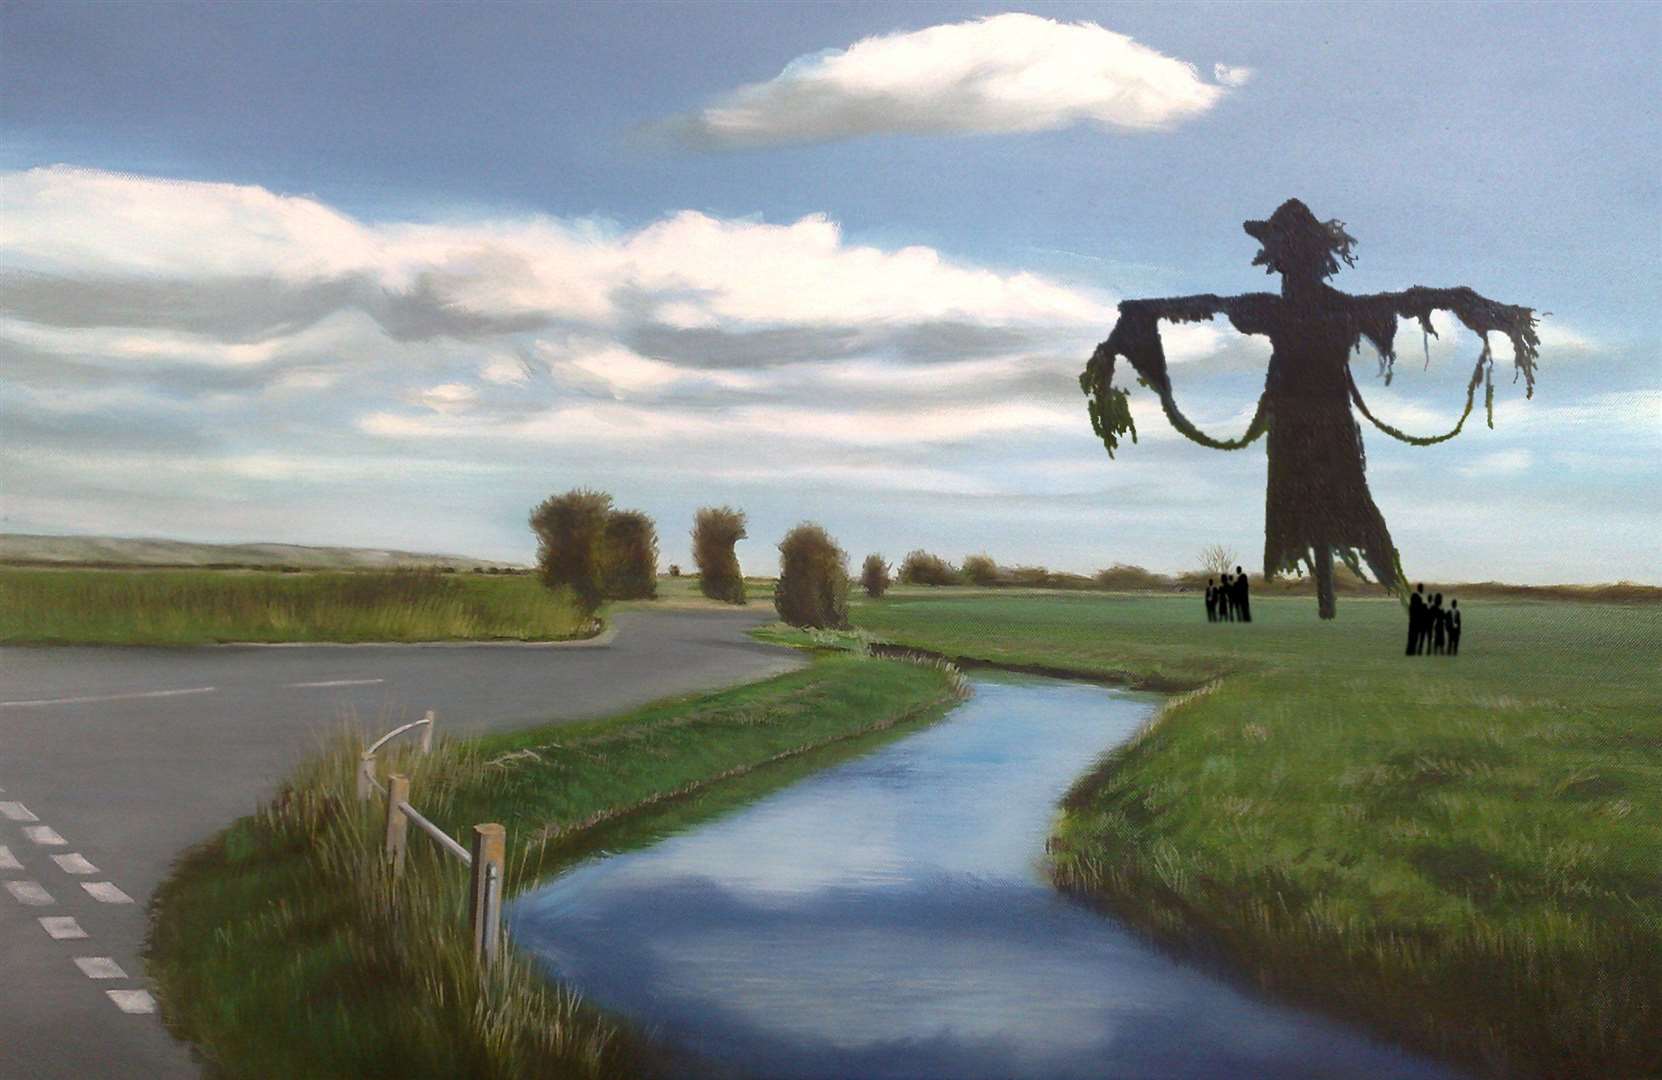 The proposed Scarecrow of the South, as envisaged by artist Terry Anthony